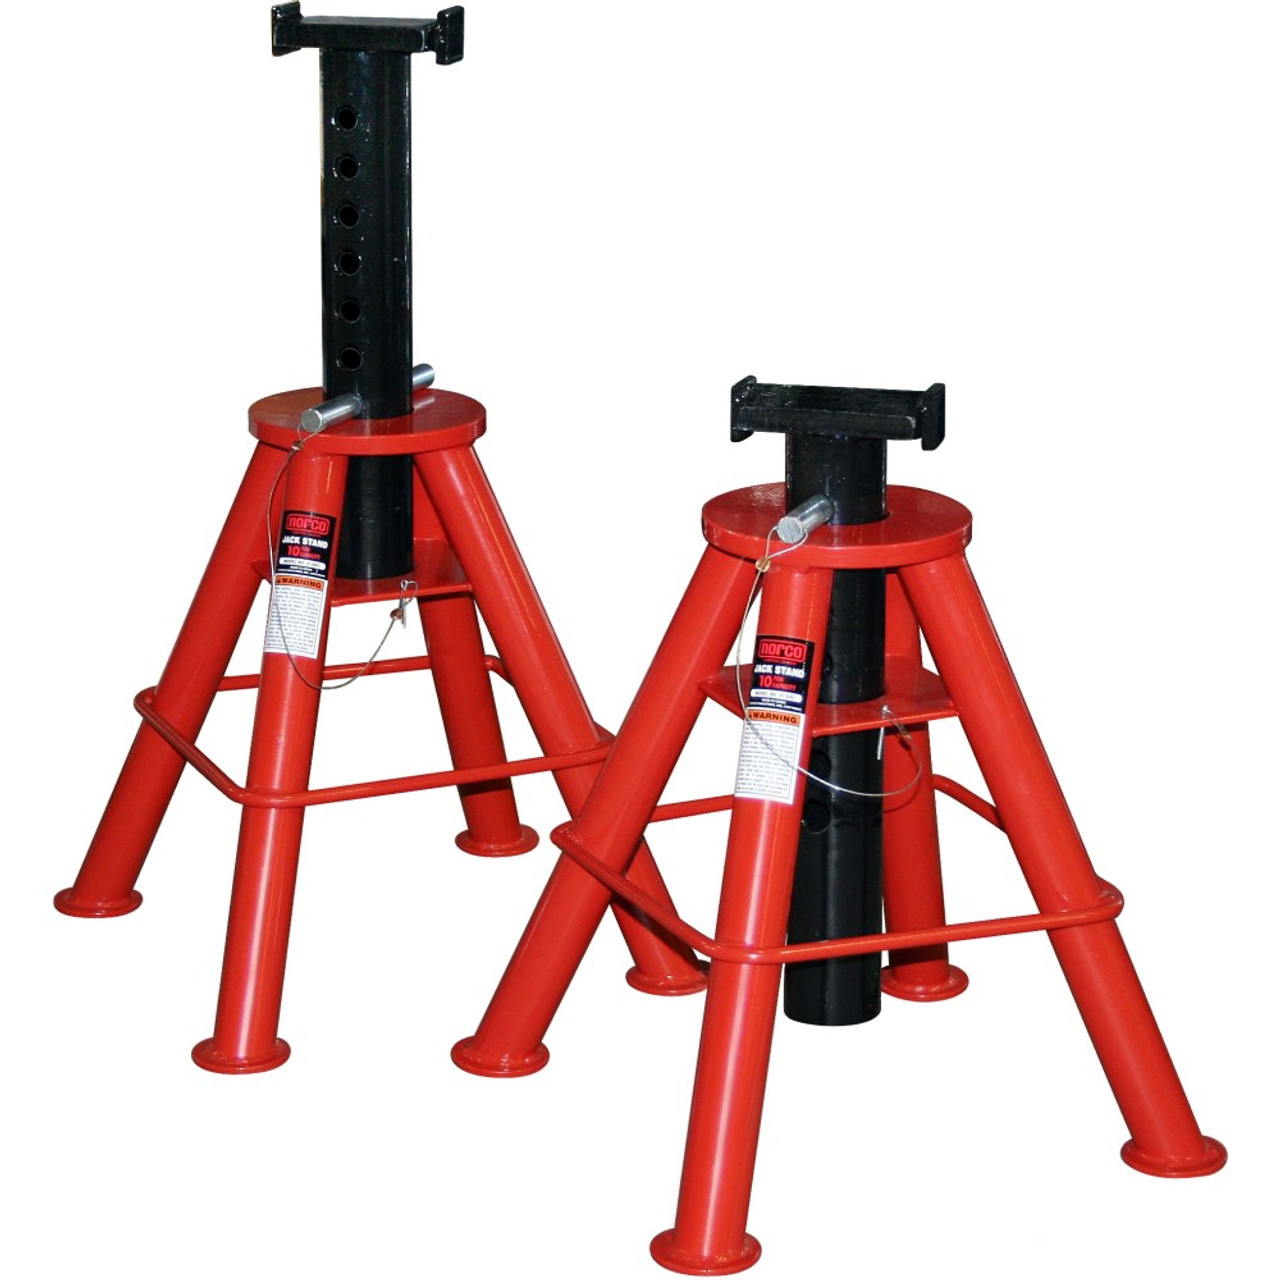 Norco 81208i: 10 Ton Short Height Jack Stands